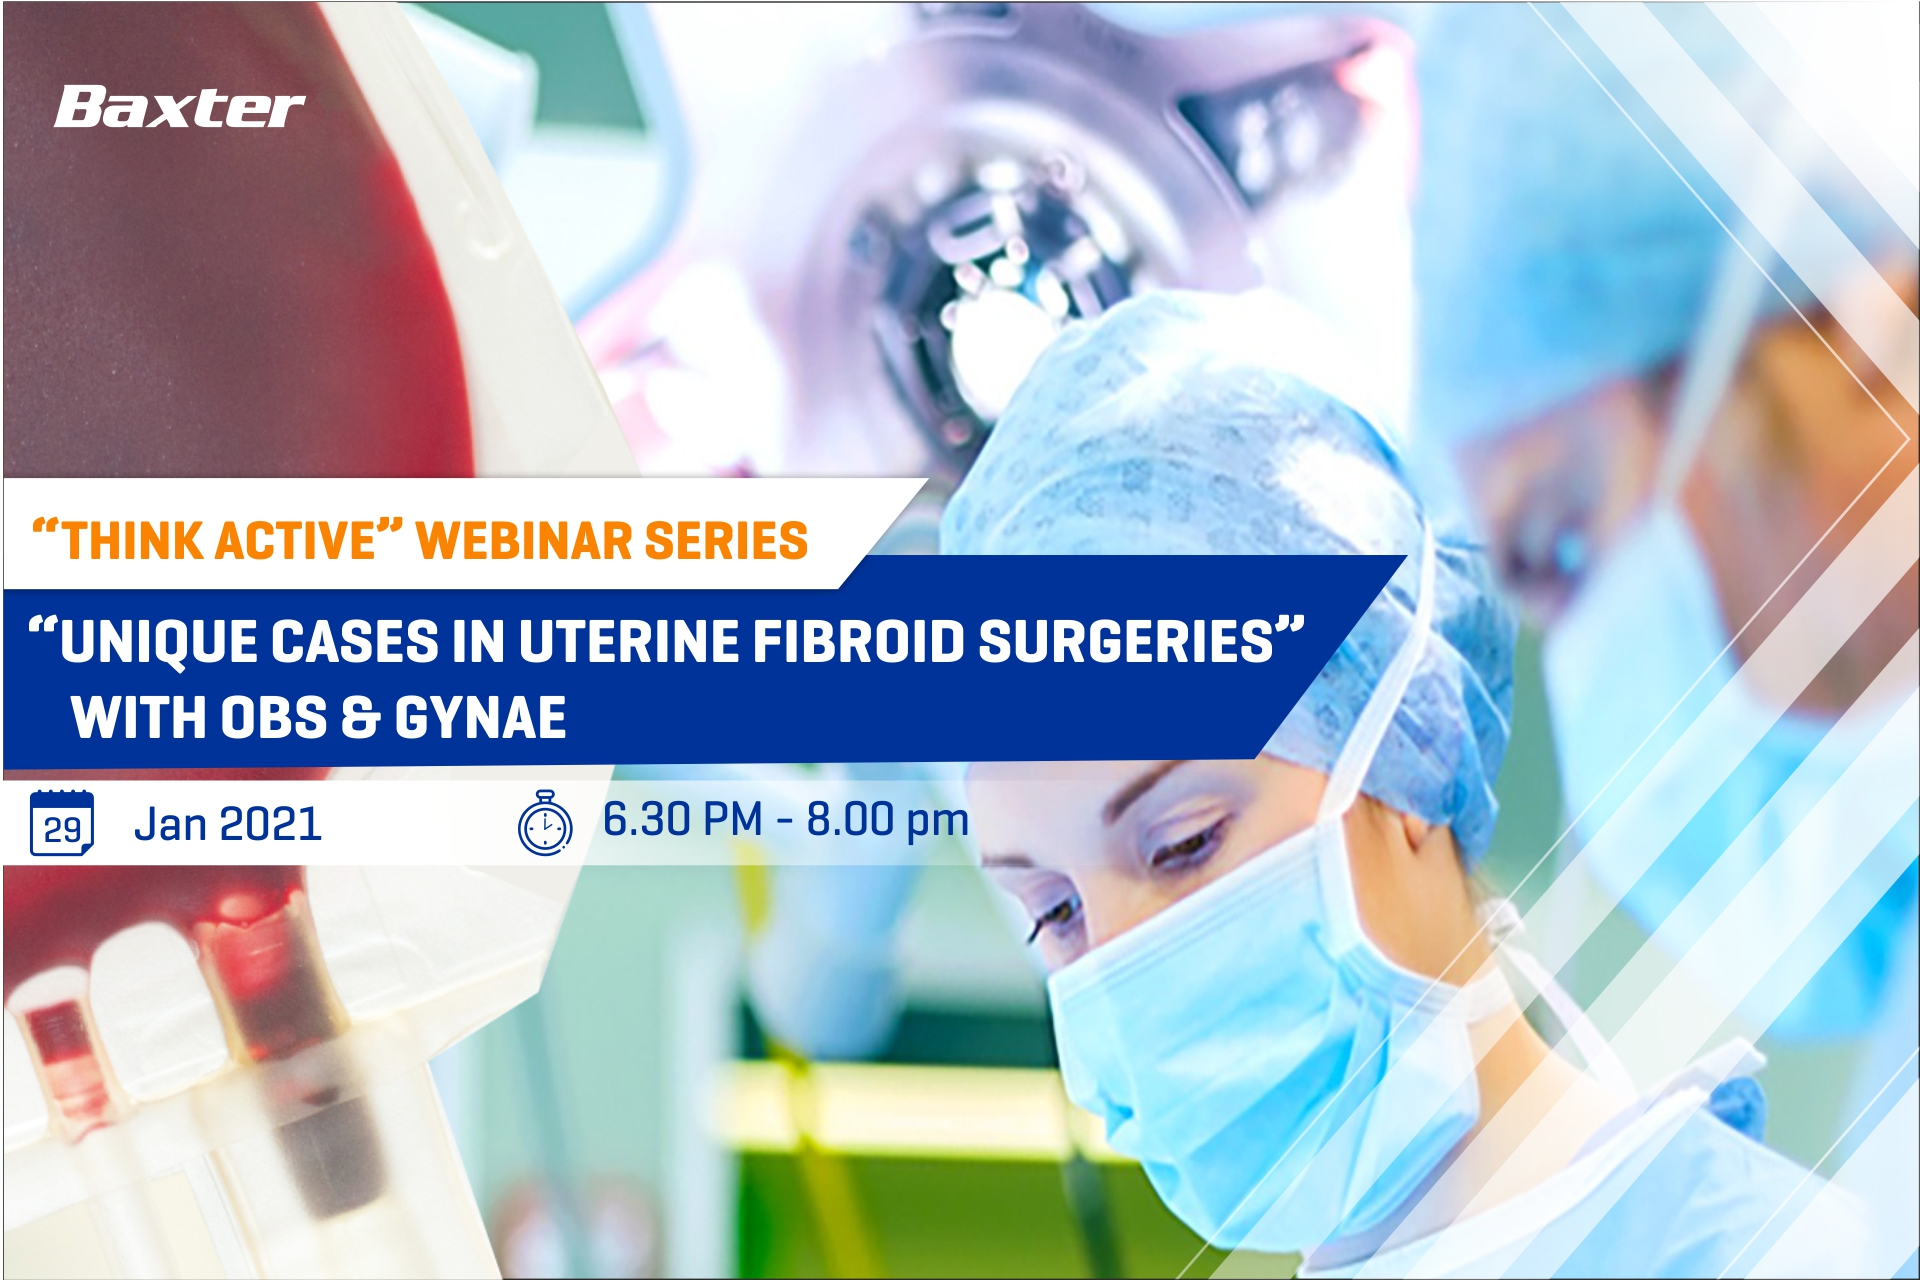 Think Active Series: “Unique Cases in Uterine Fibroid Surgeries” with Obs & Gynae